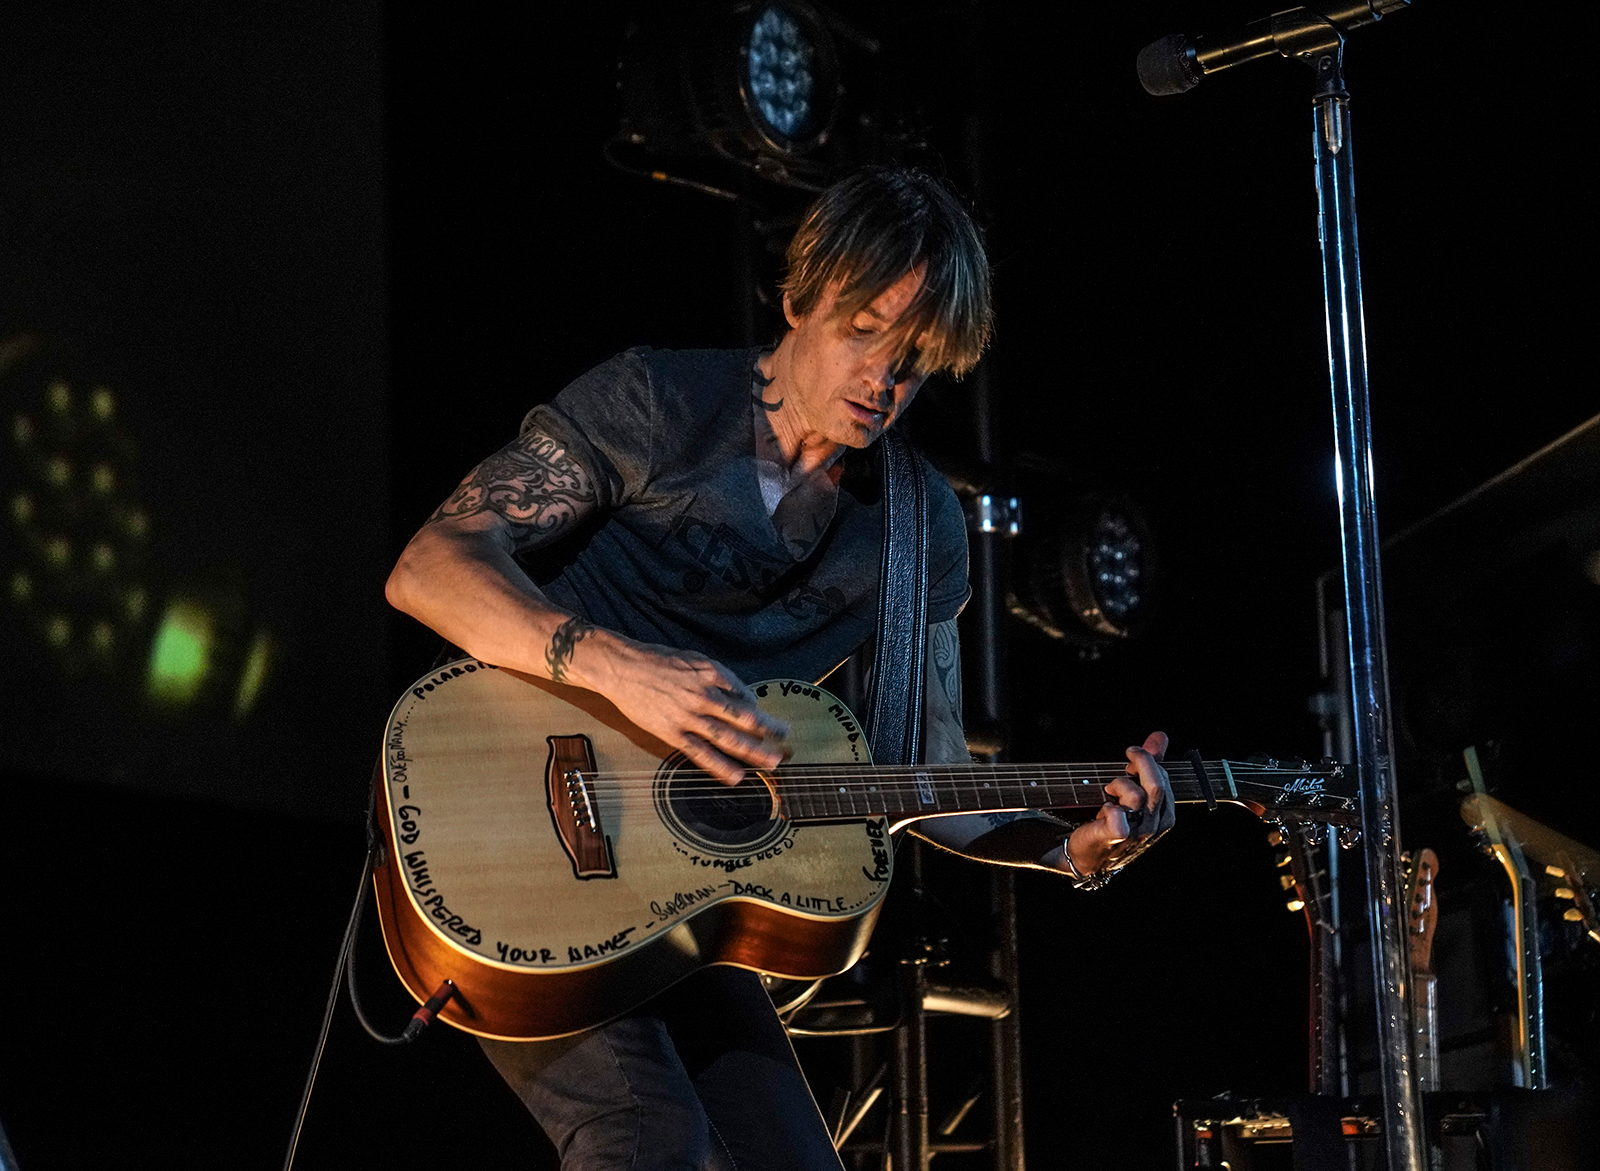 Keith Urban, performing for first responders at the Stardust Drive In Theatre in Watertown, Tennessee on Thursday, May 14. The private show was set up exclusively for more than 200 doctors, nurses, emergency medical technicians and staff from Vanderbilt Health, part of Vanderbilt University Medical Center.